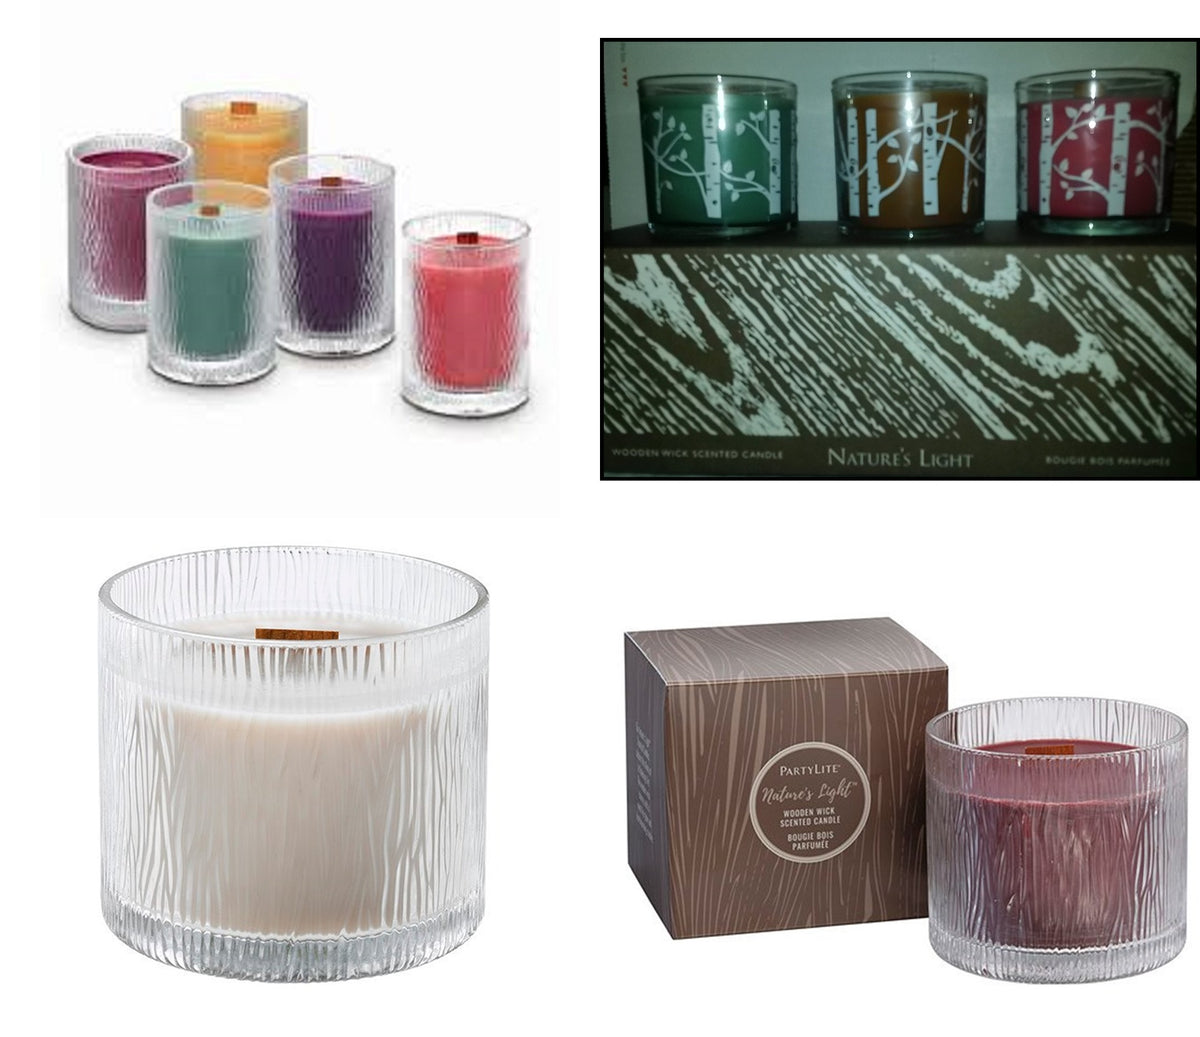 PartyLite to close Batavia candle factory